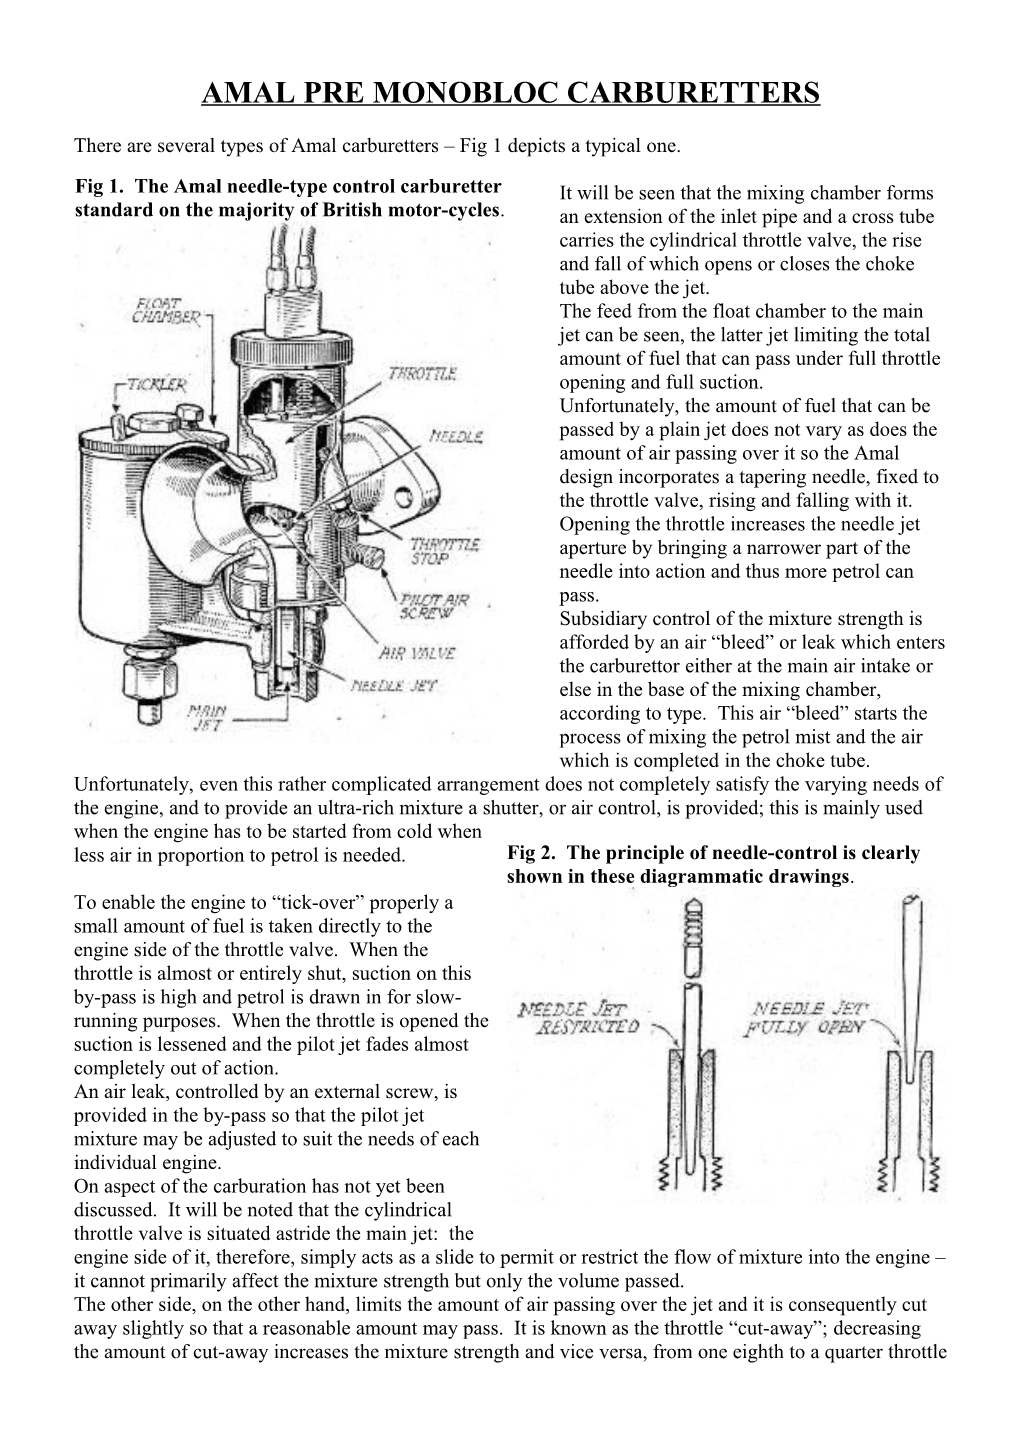 There Are Several Types of Amal Carburetters Fig 1 Depicts a Typical One